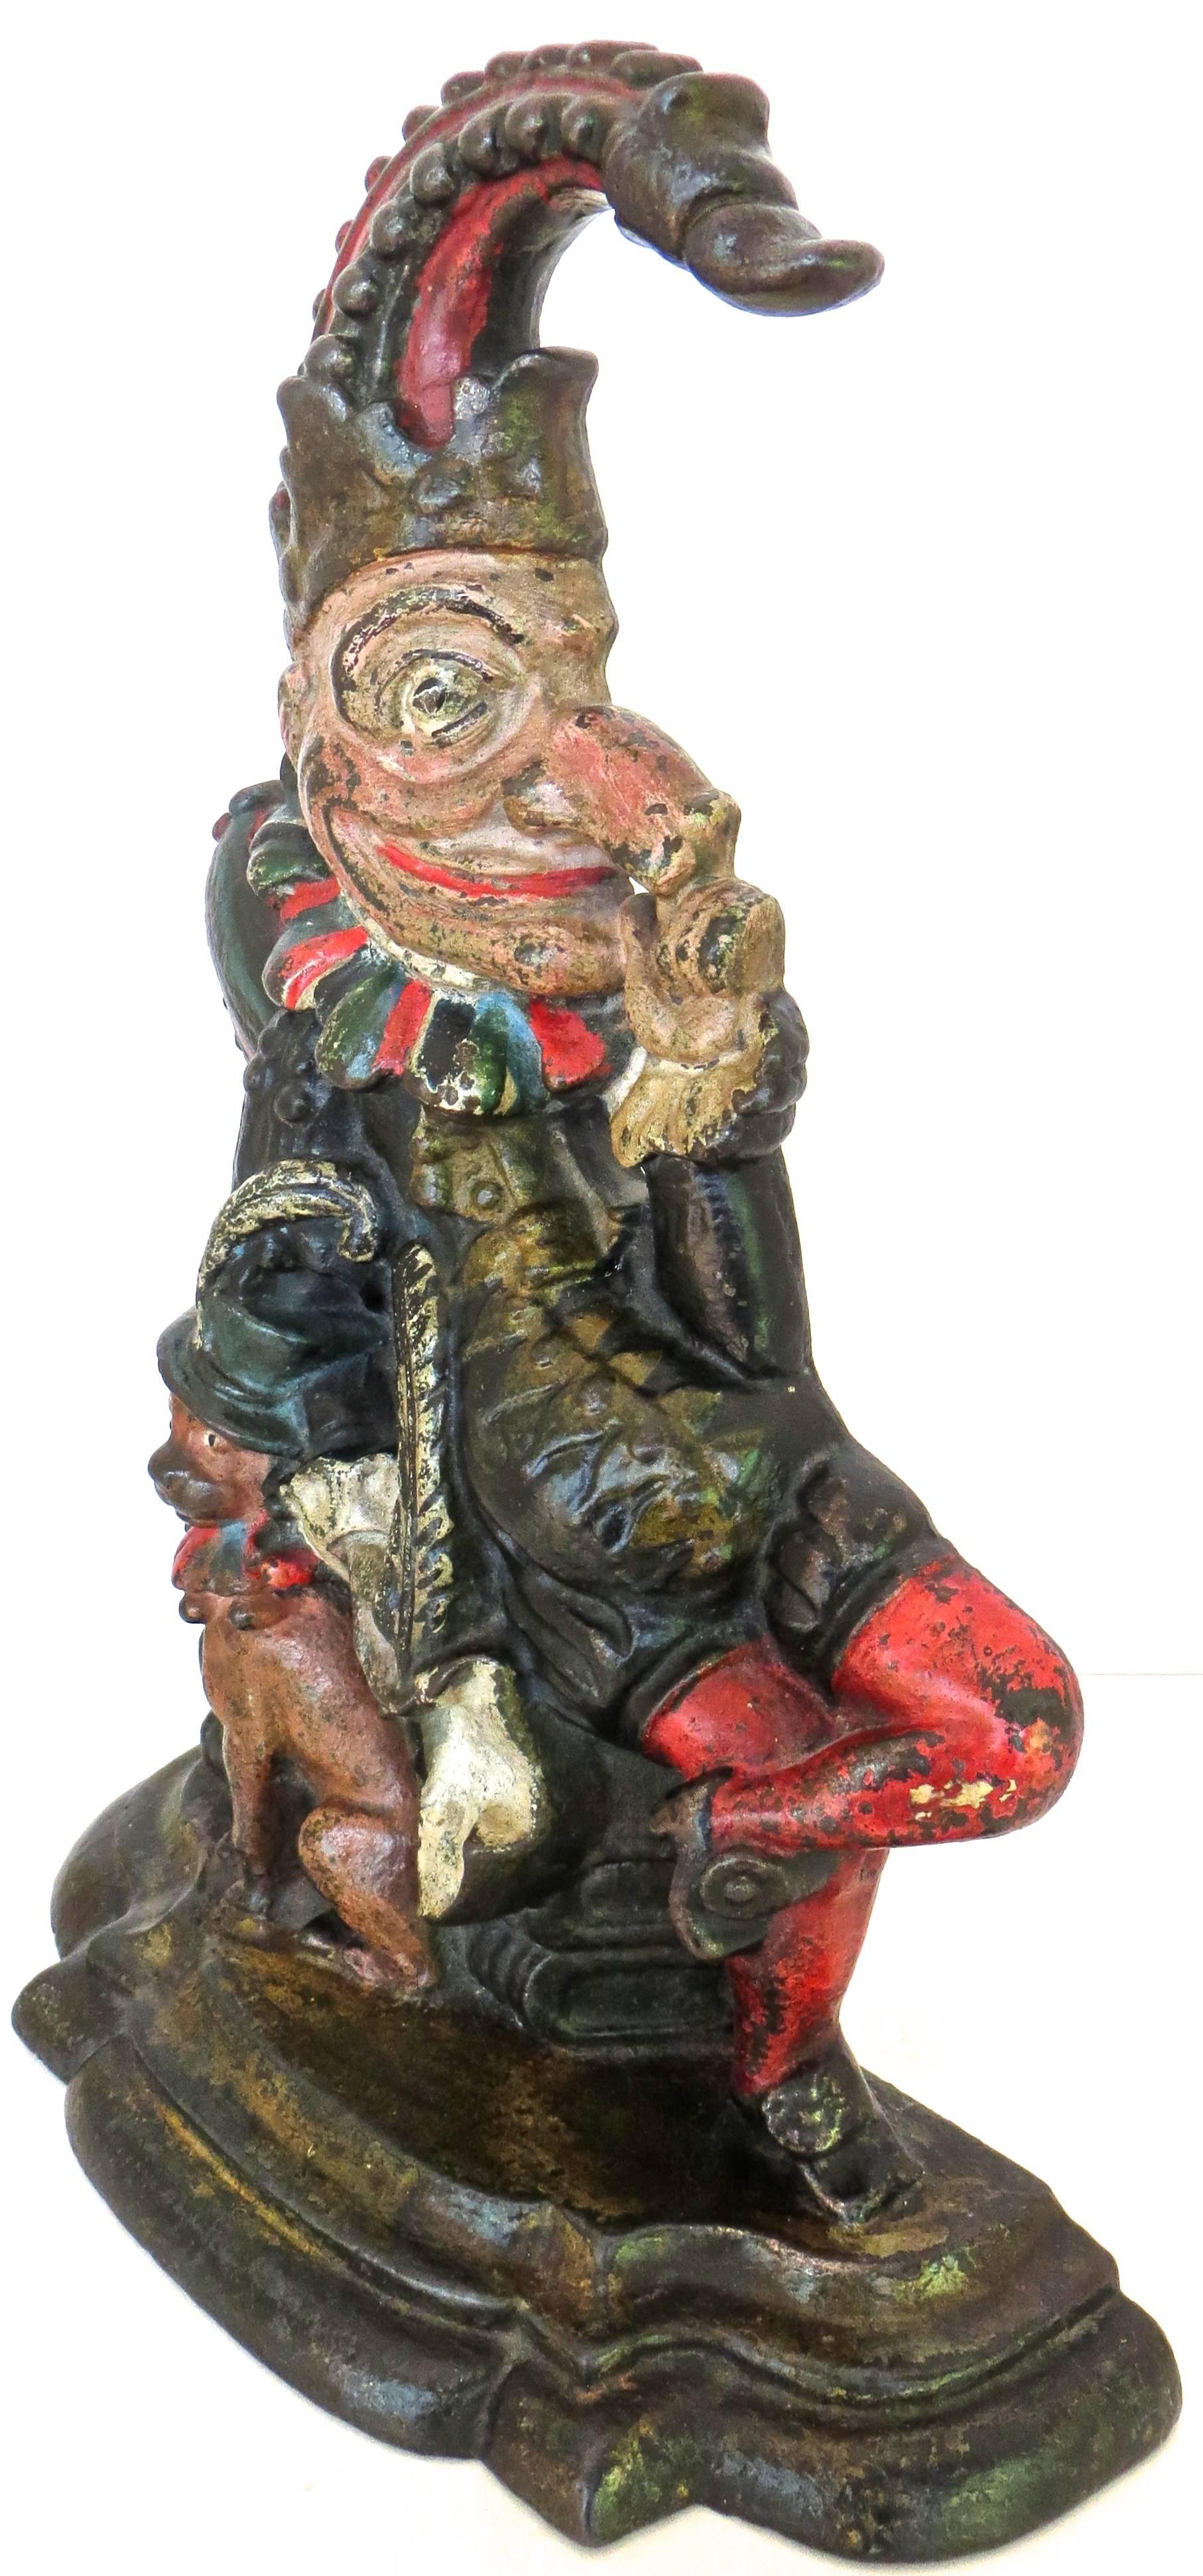 The subject matter depicts the proverbial 16th century stage character "Punch", of “Punch and Judy” notoriety. He is sitting on a stack of books with a dog (Toby) by his side. The finely detailed and intricate iron casting portrays